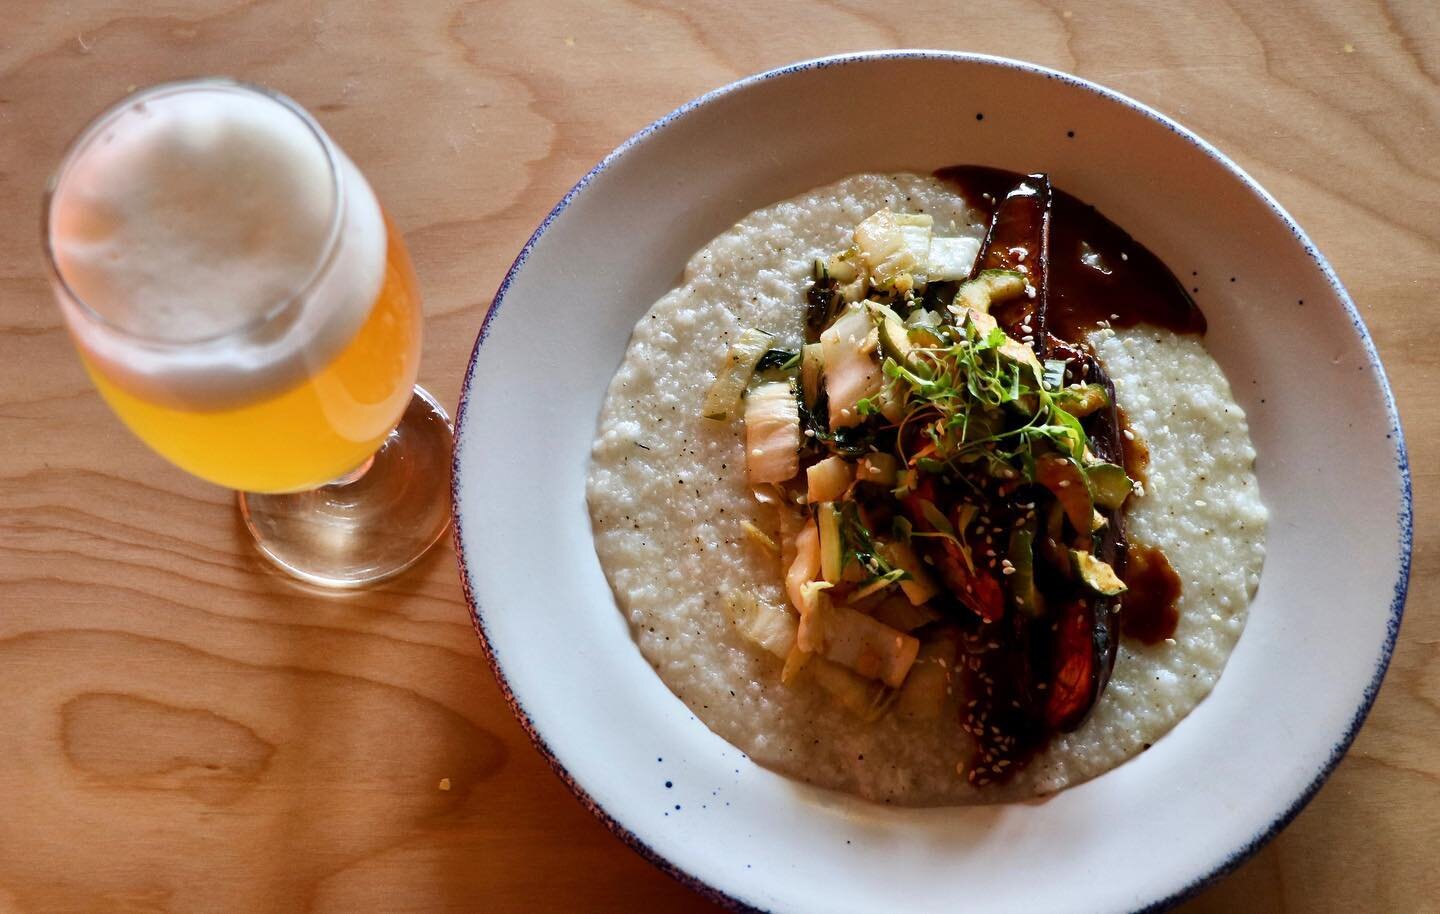 Who doesn&rsquo;t love a good happy hour! Every Wednesday &amp; Thursday at 5p- 7p $4 Market Garden Beers &amp; $5 house wine! 🥂🍻✨
.
.
Char Siu Eggplant- rice congee, cucumber chili salad, hoisin vinaigrette, braised cabbage, bok choy (V). 
.
.
Mak